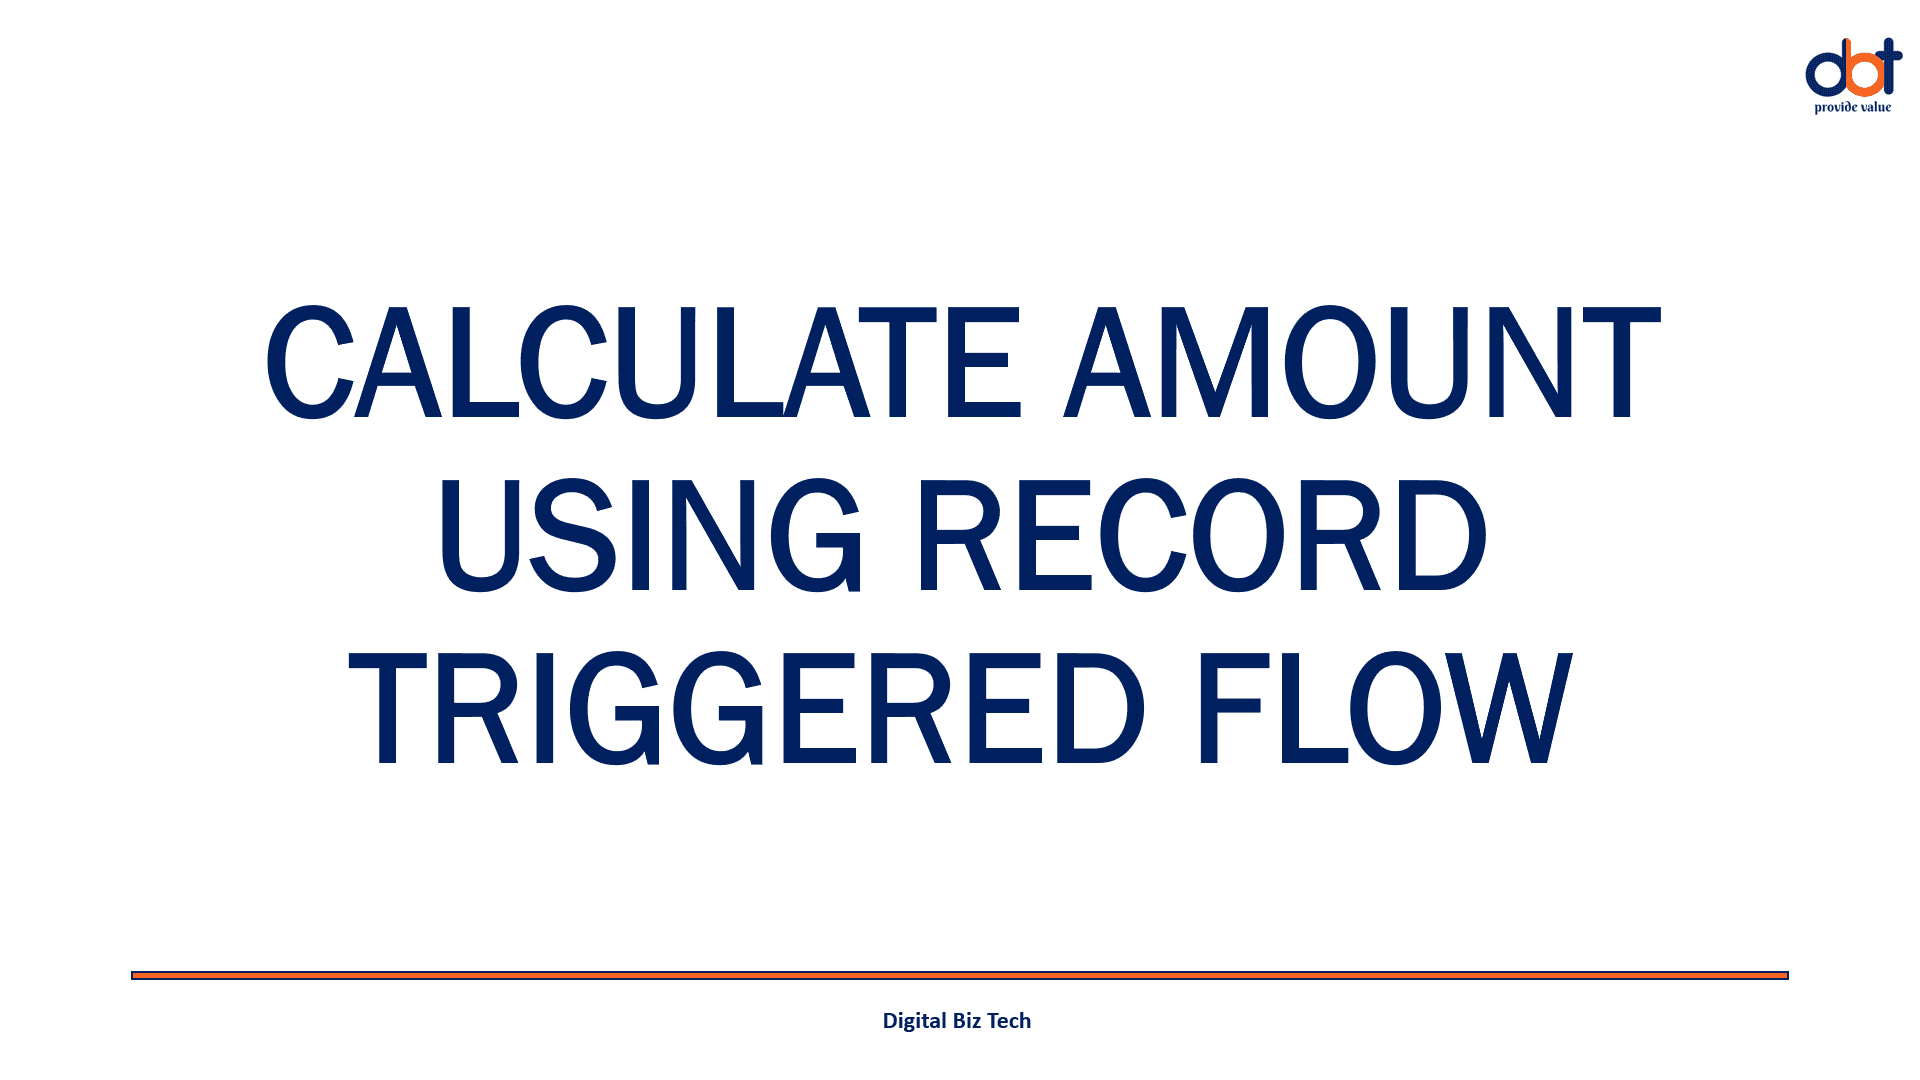 Calculate Amount using Record Triggered Flow